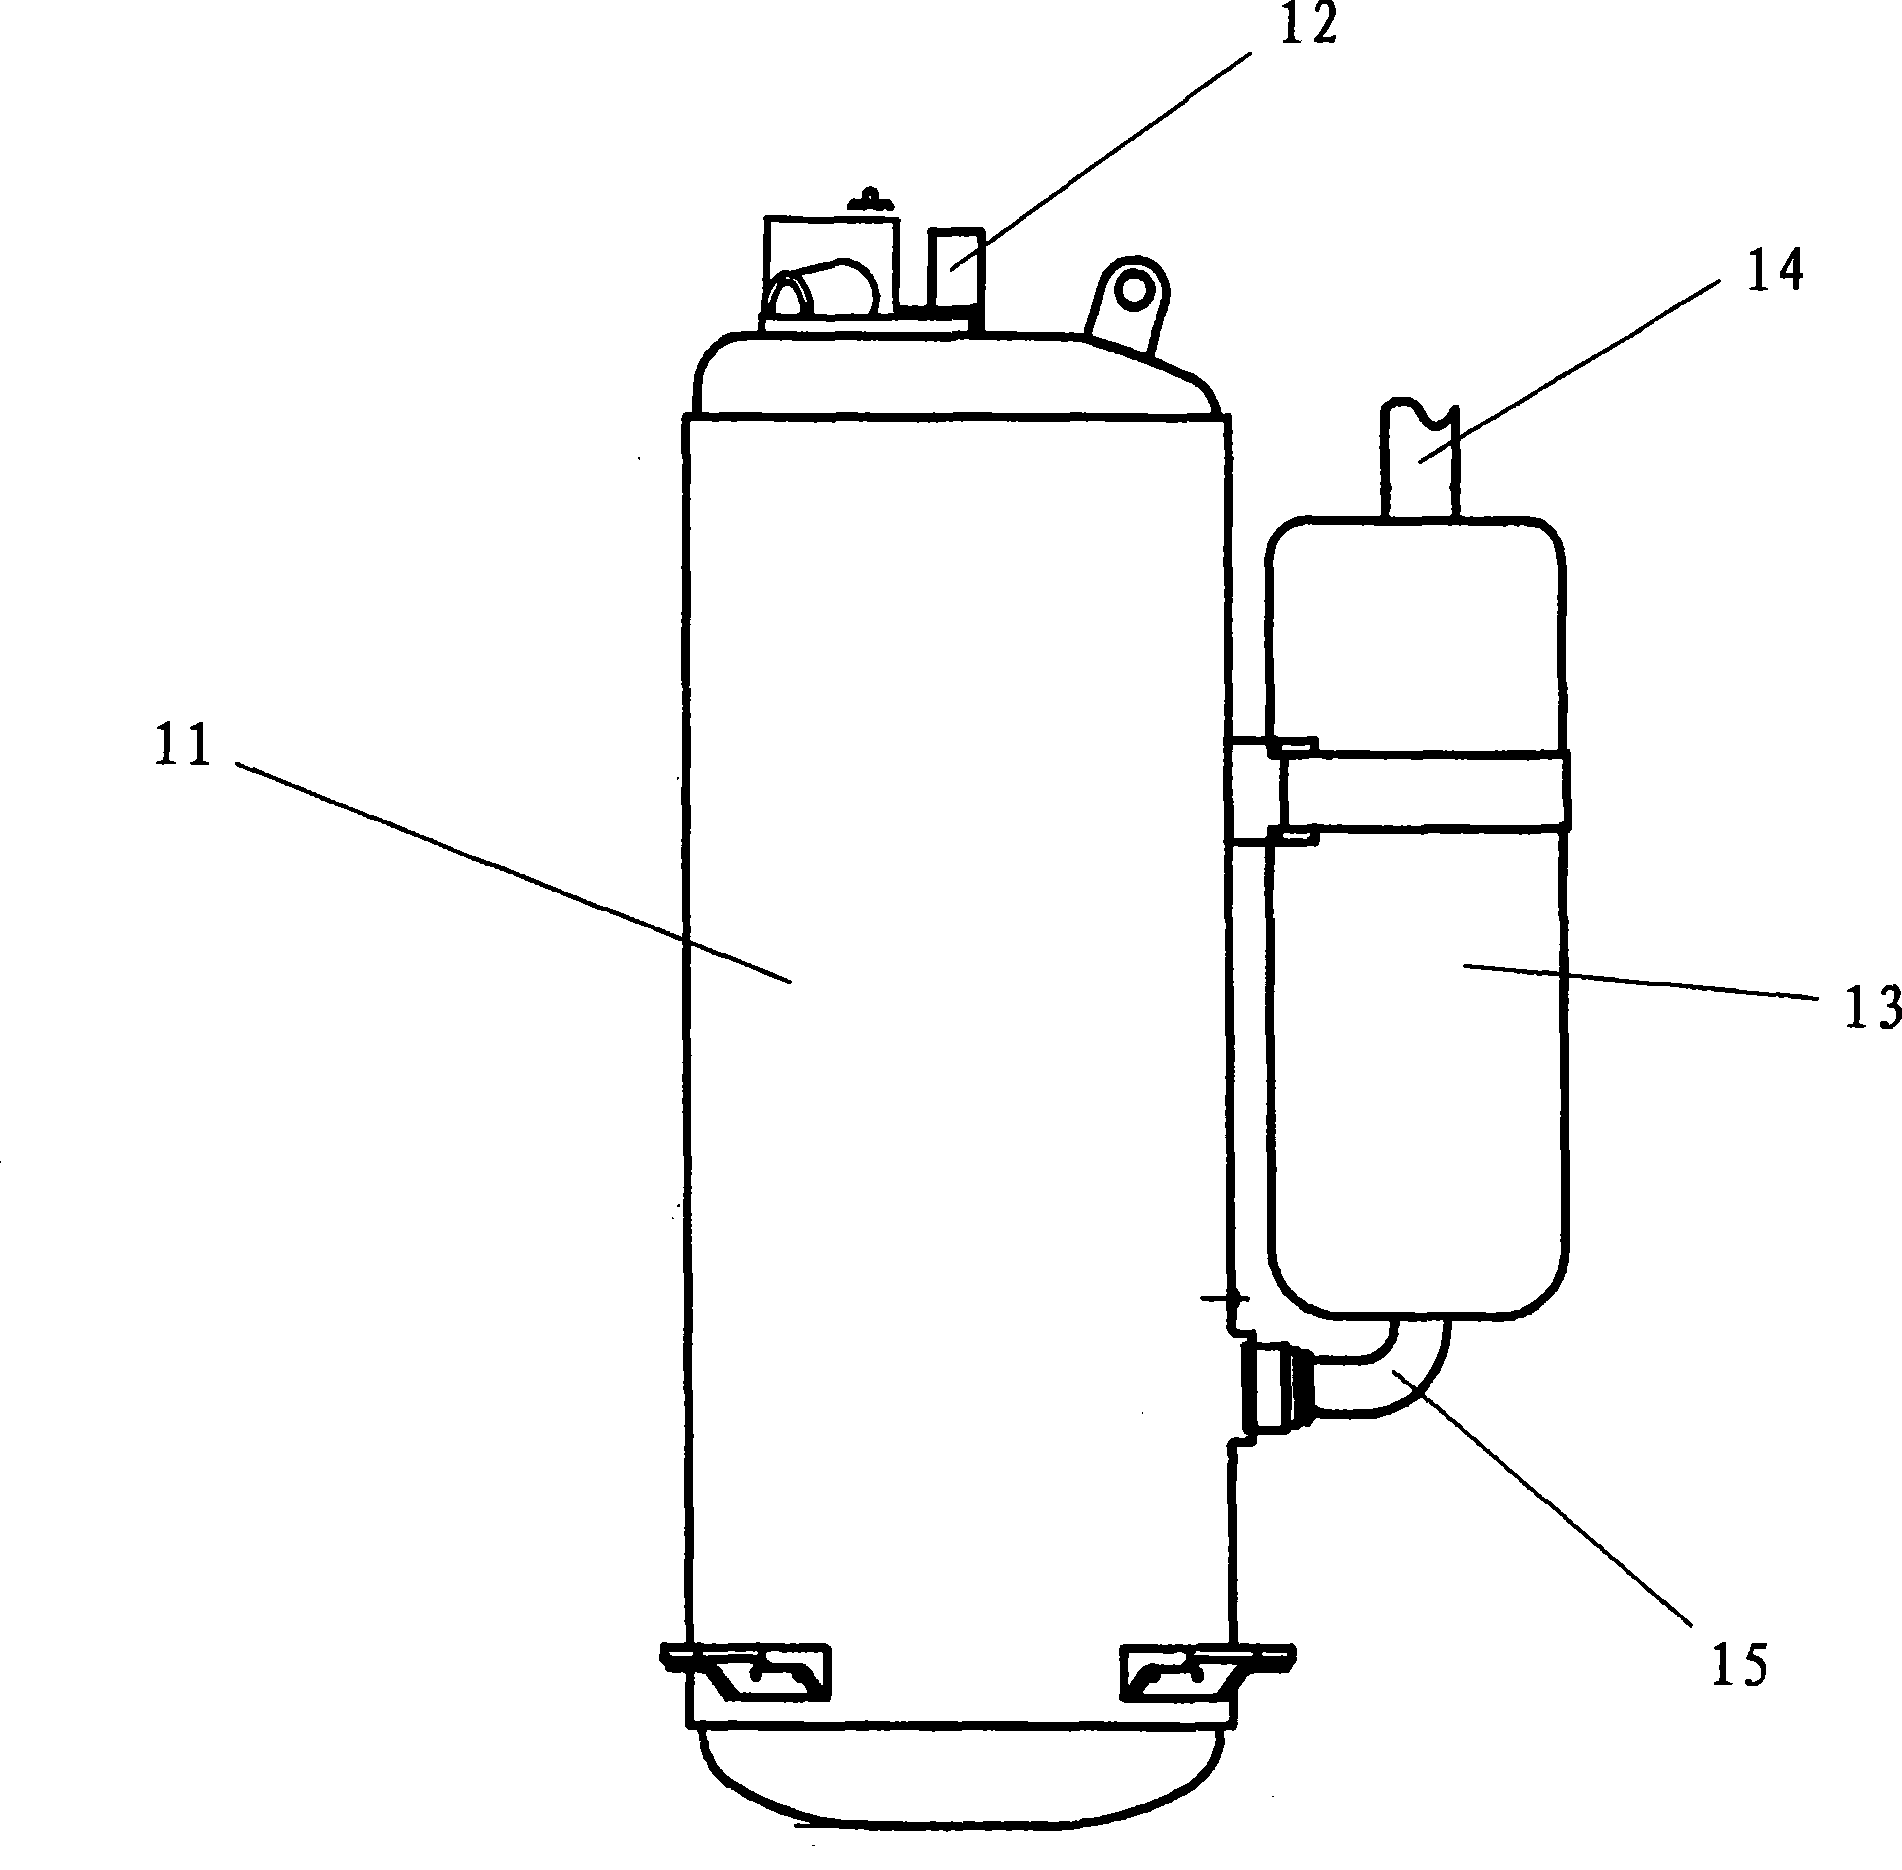 Compact structure of liquid reservoir and oil separator of compressor